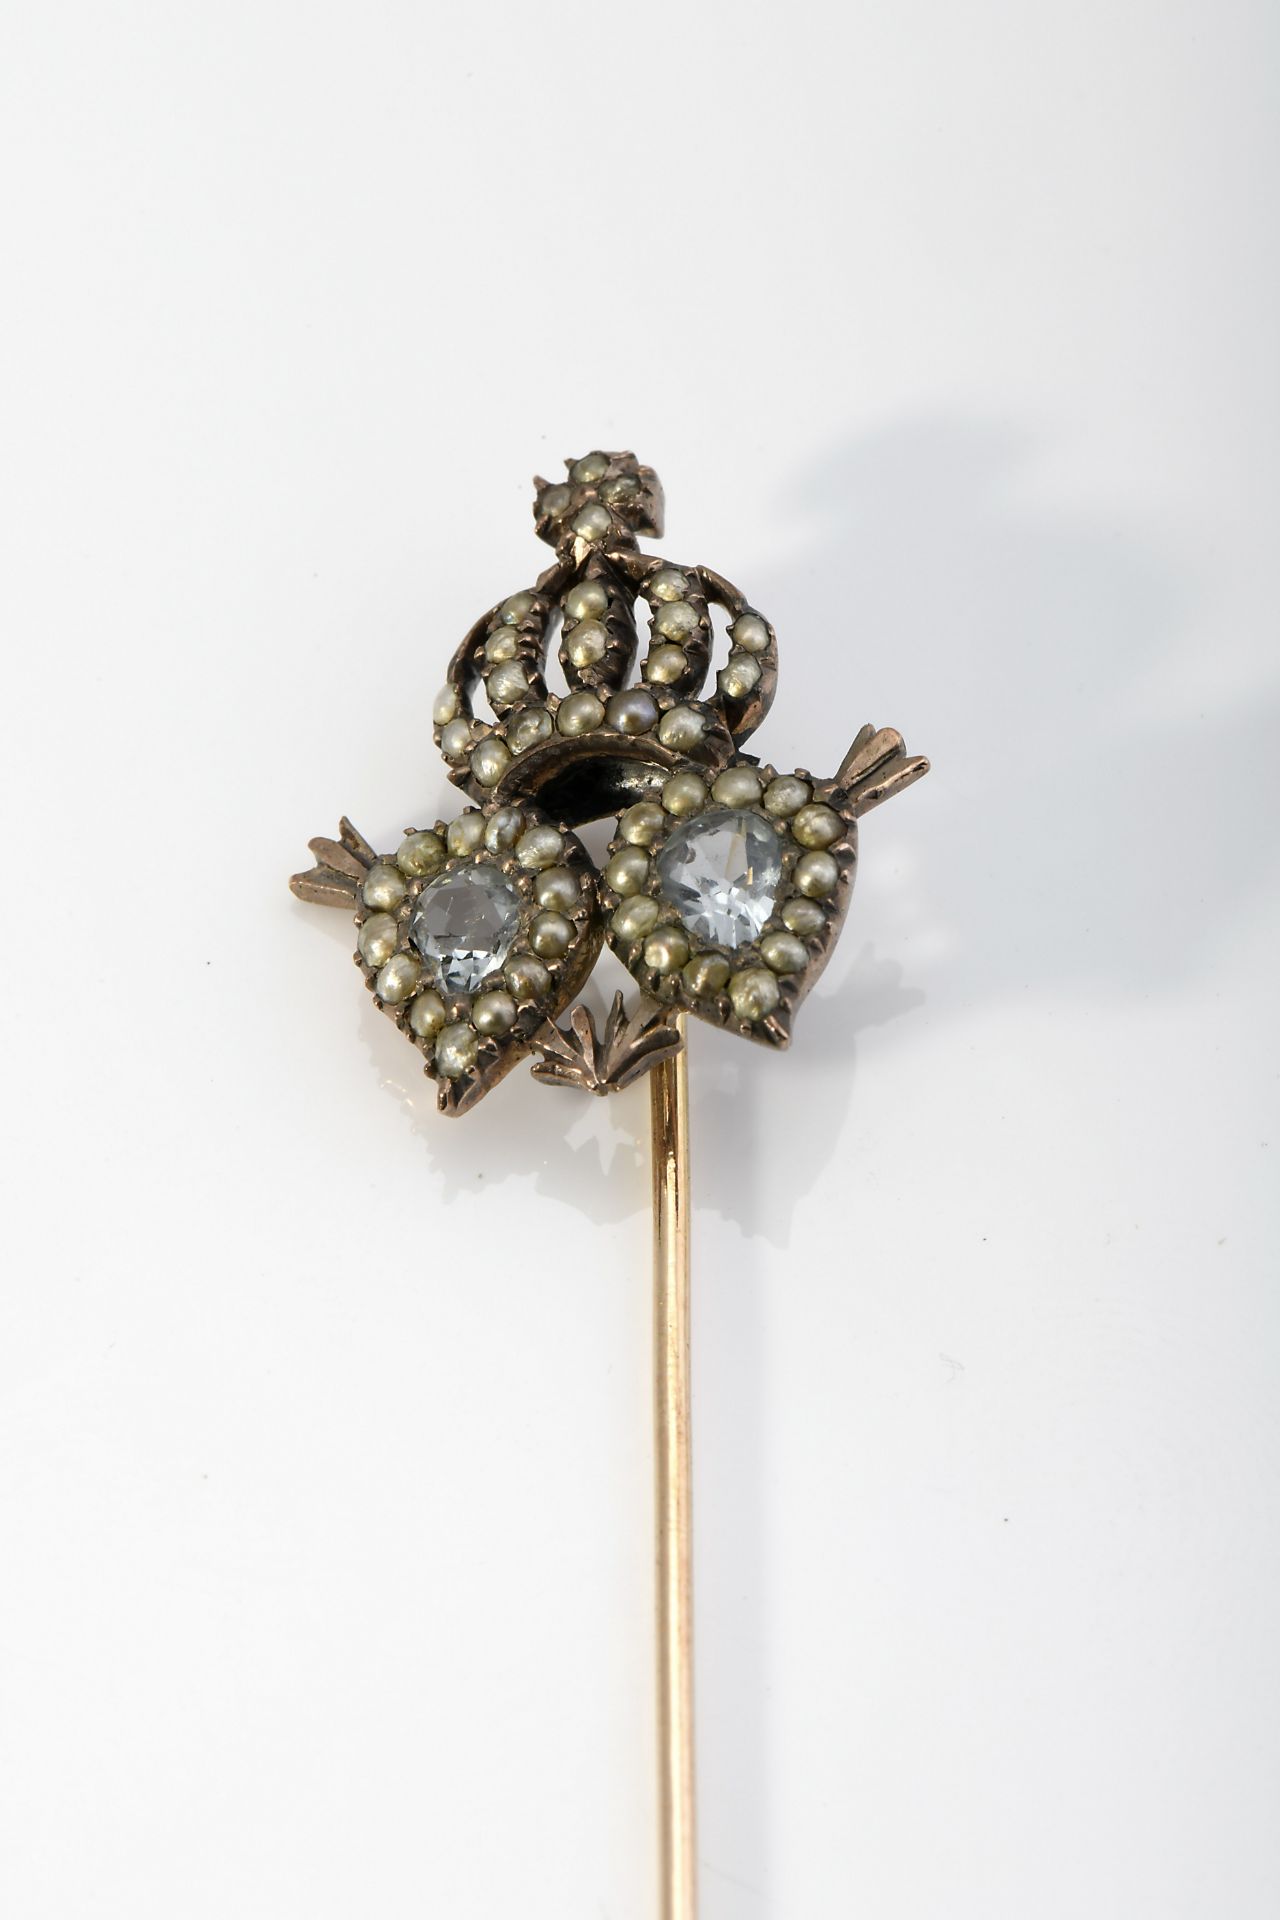 A "Two hearts surmounted by Brazilian imperial crown" scarf pin